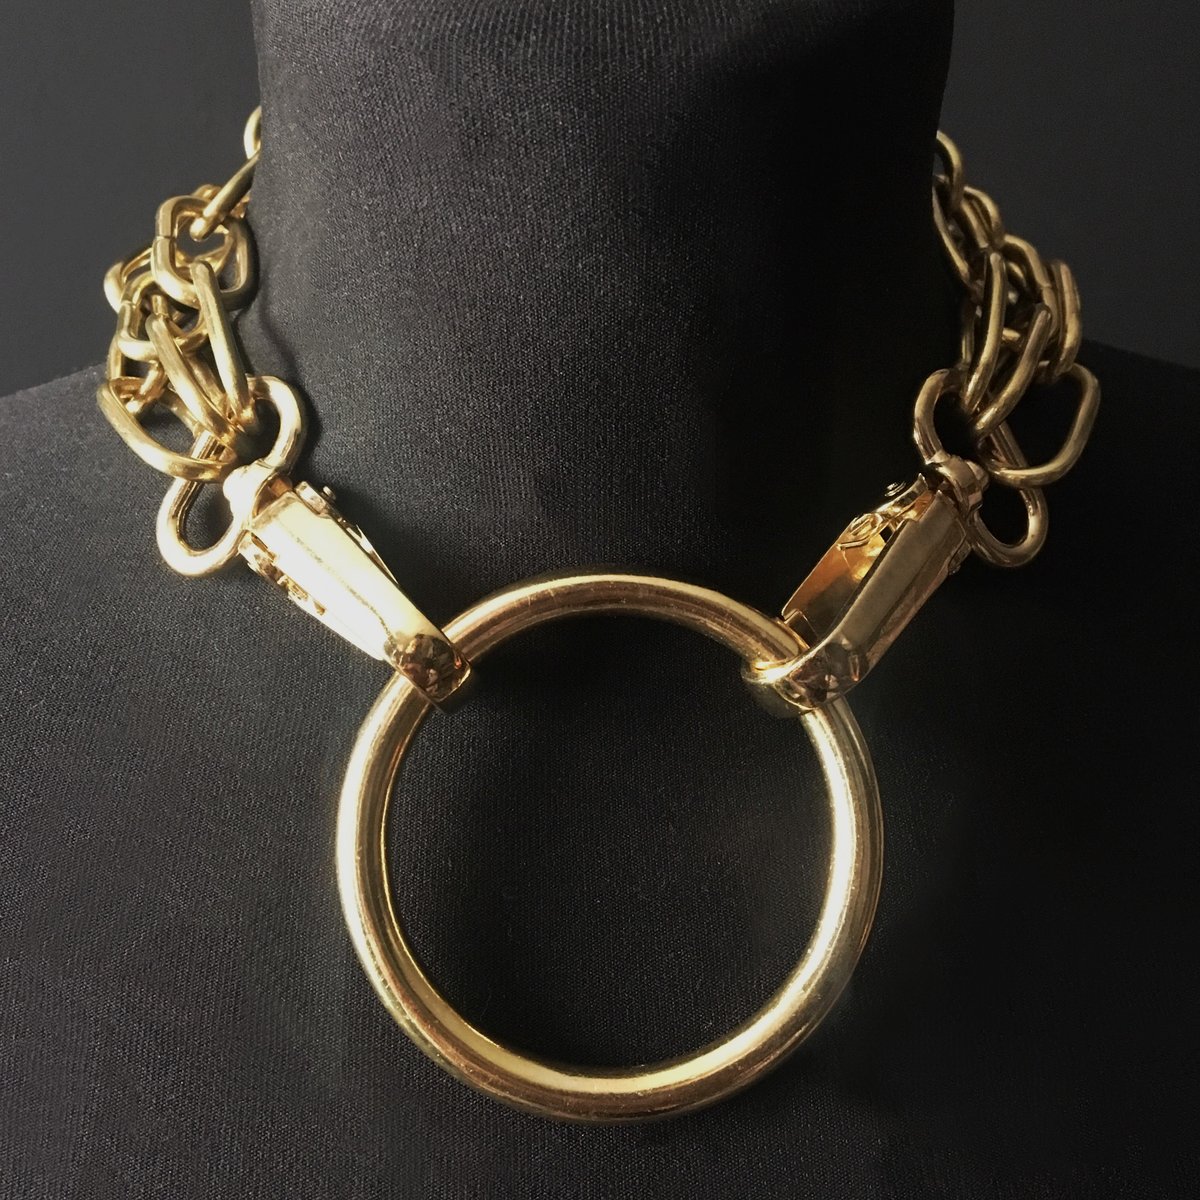 Gold triple chain ring necklace